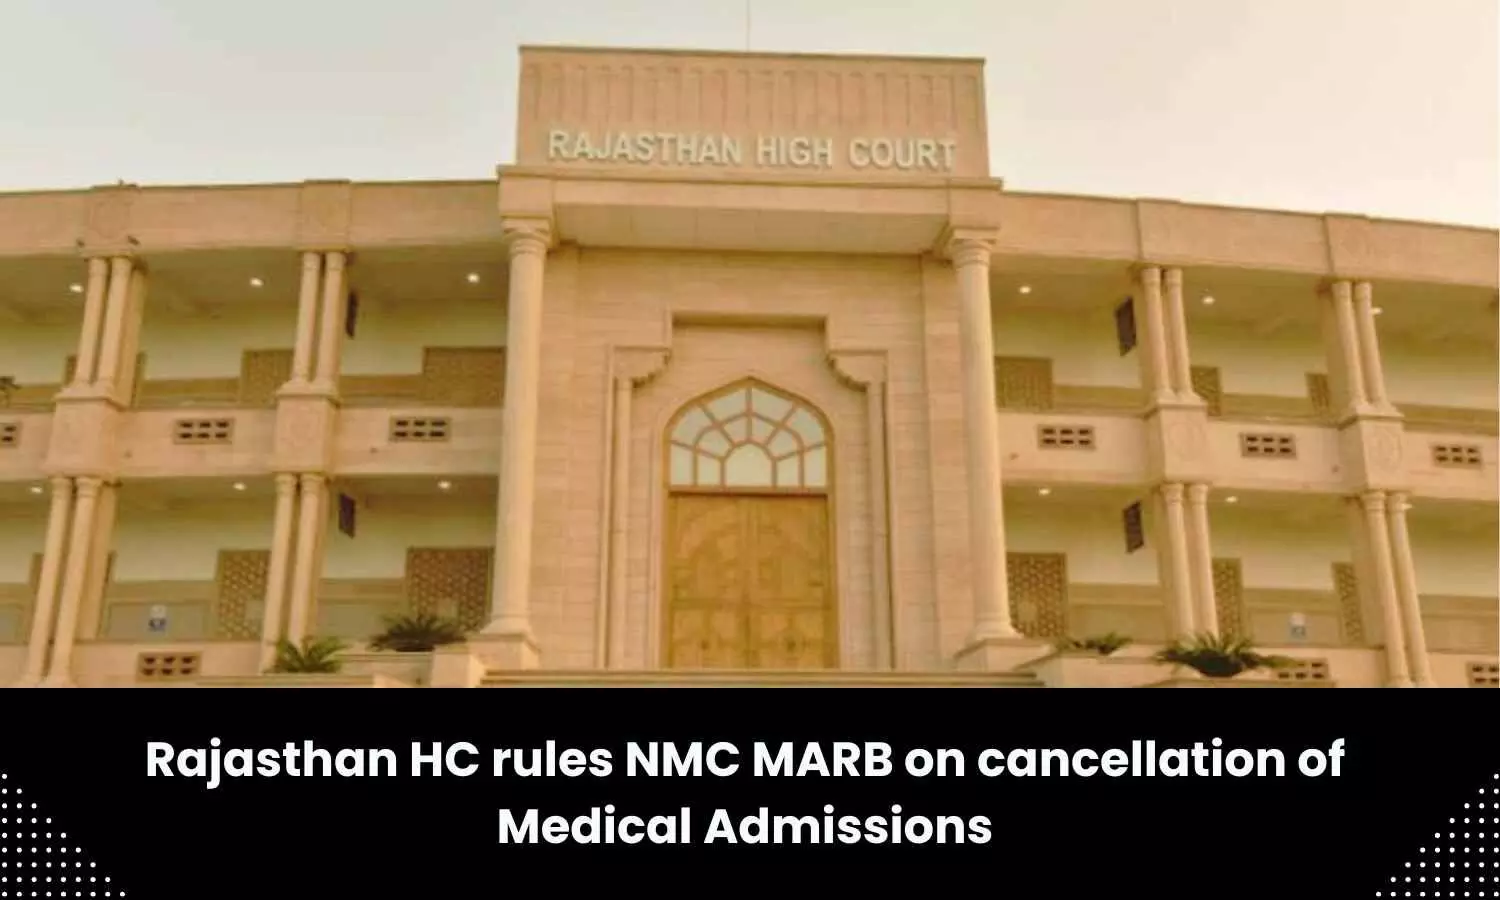 Rajasthan HC rules NMC MARB cannot retrospectively cancel medical admissions